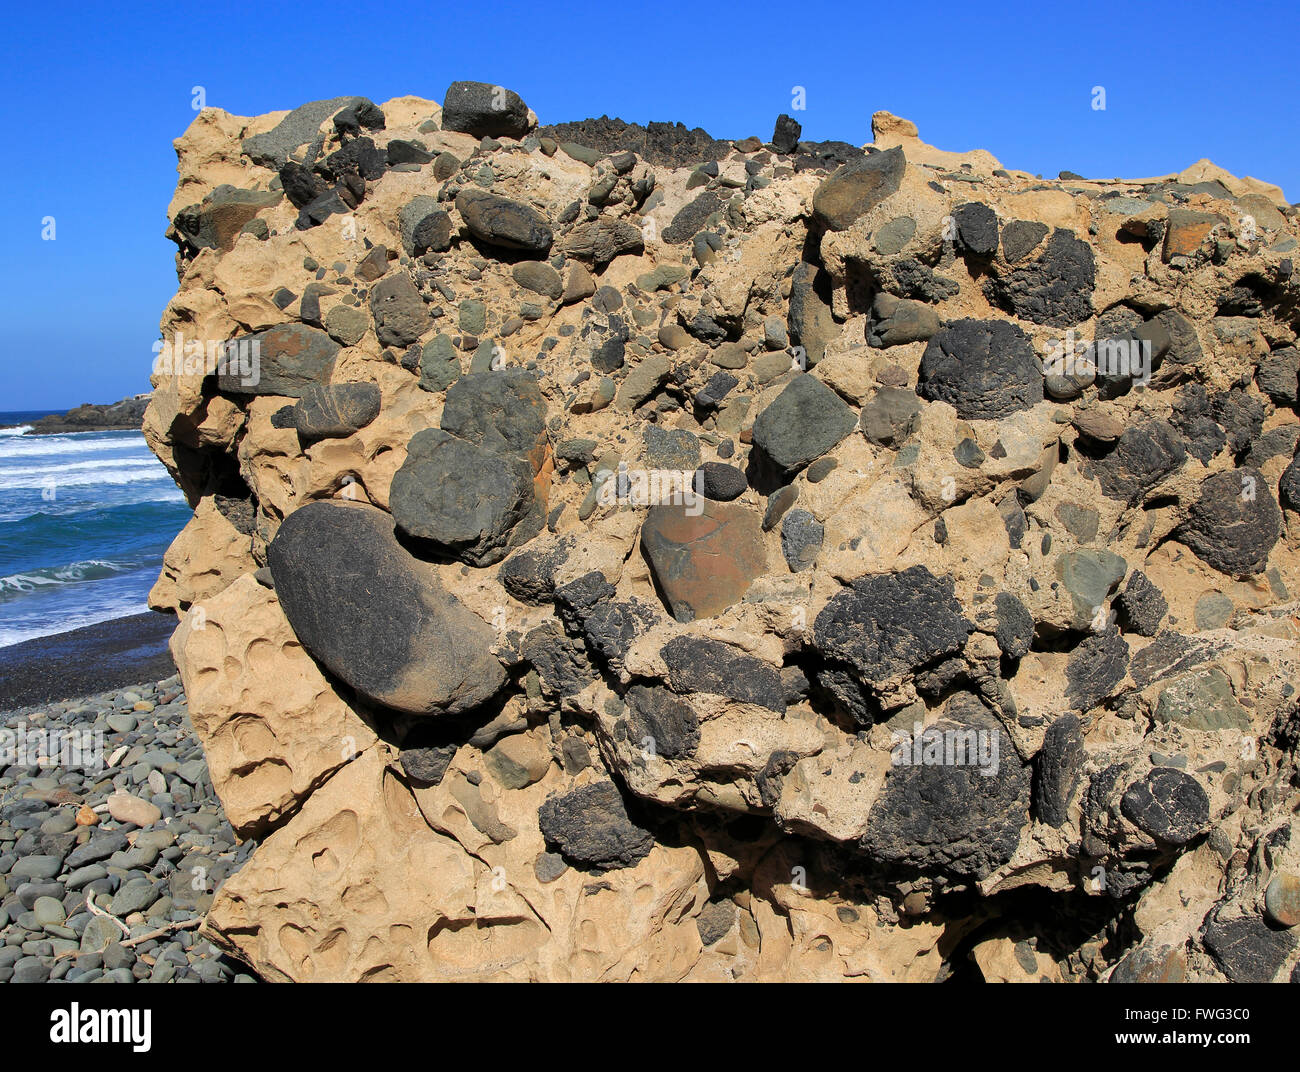 Conglomerate rock with volcanic bombs embedded in sediment, Playa de Garcey, Fuerteventura, Canary Islands, Spain Stock Photo